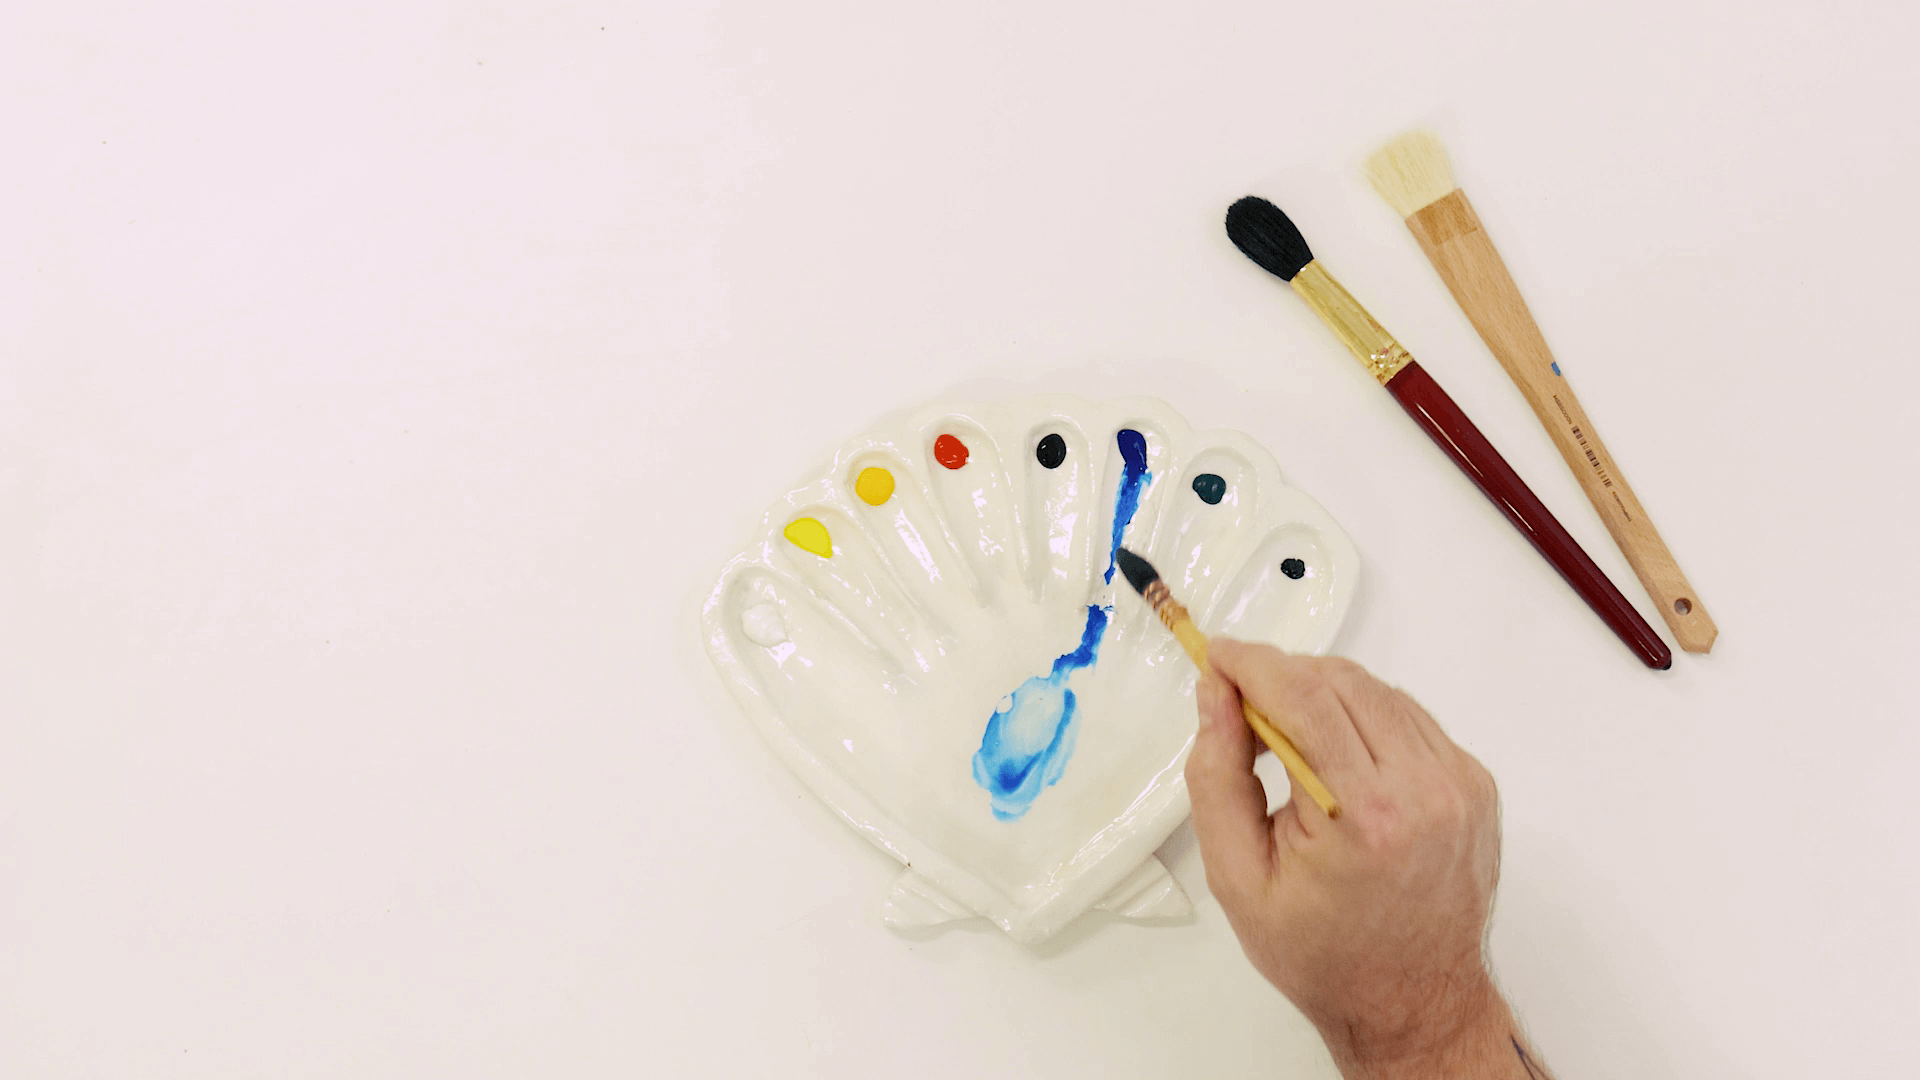 How I made Diy Air Dry Clay Palette.Ceramic Paint Palette